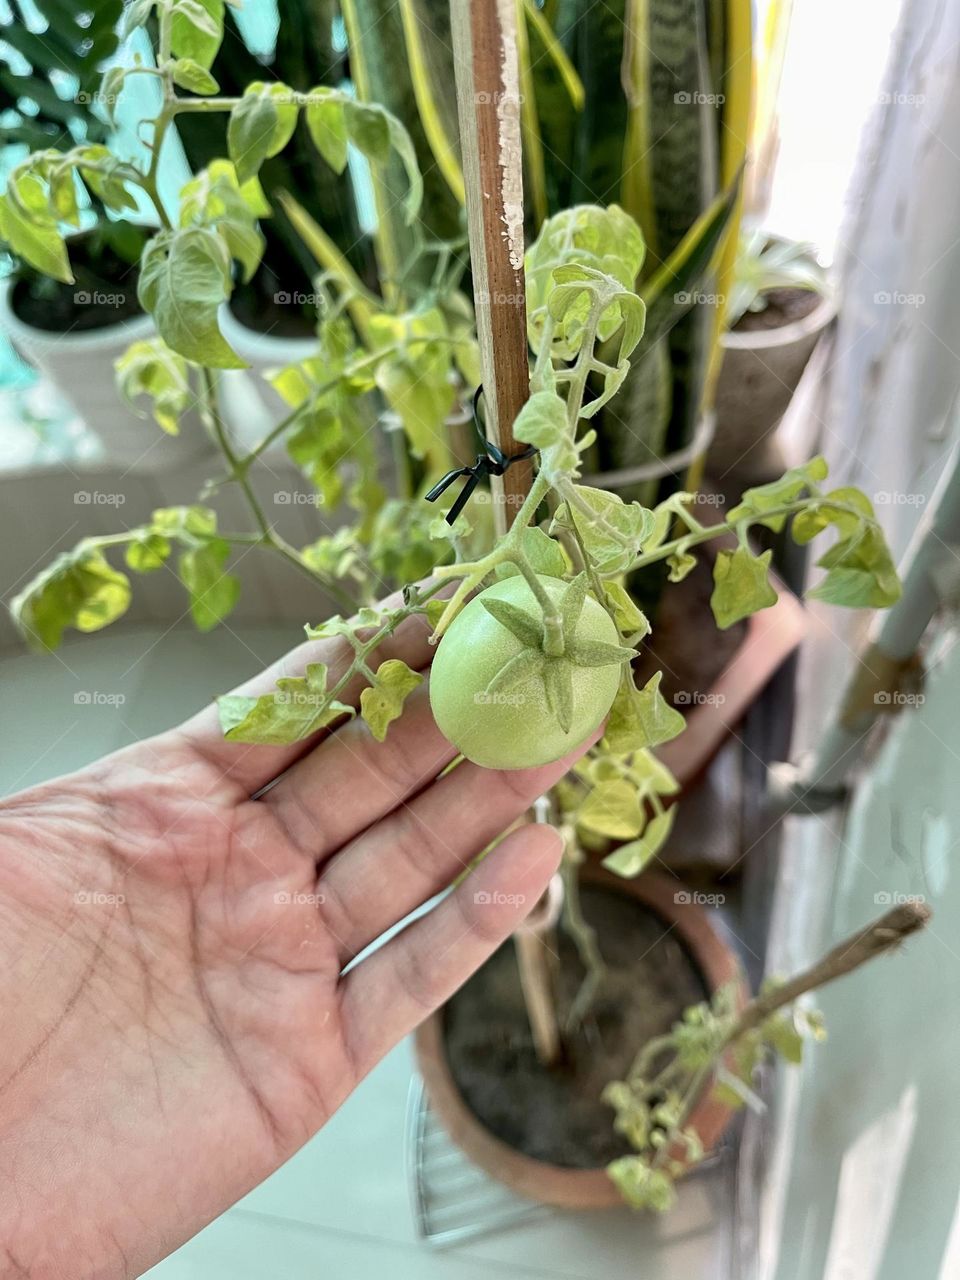 Tomato on a home plant 